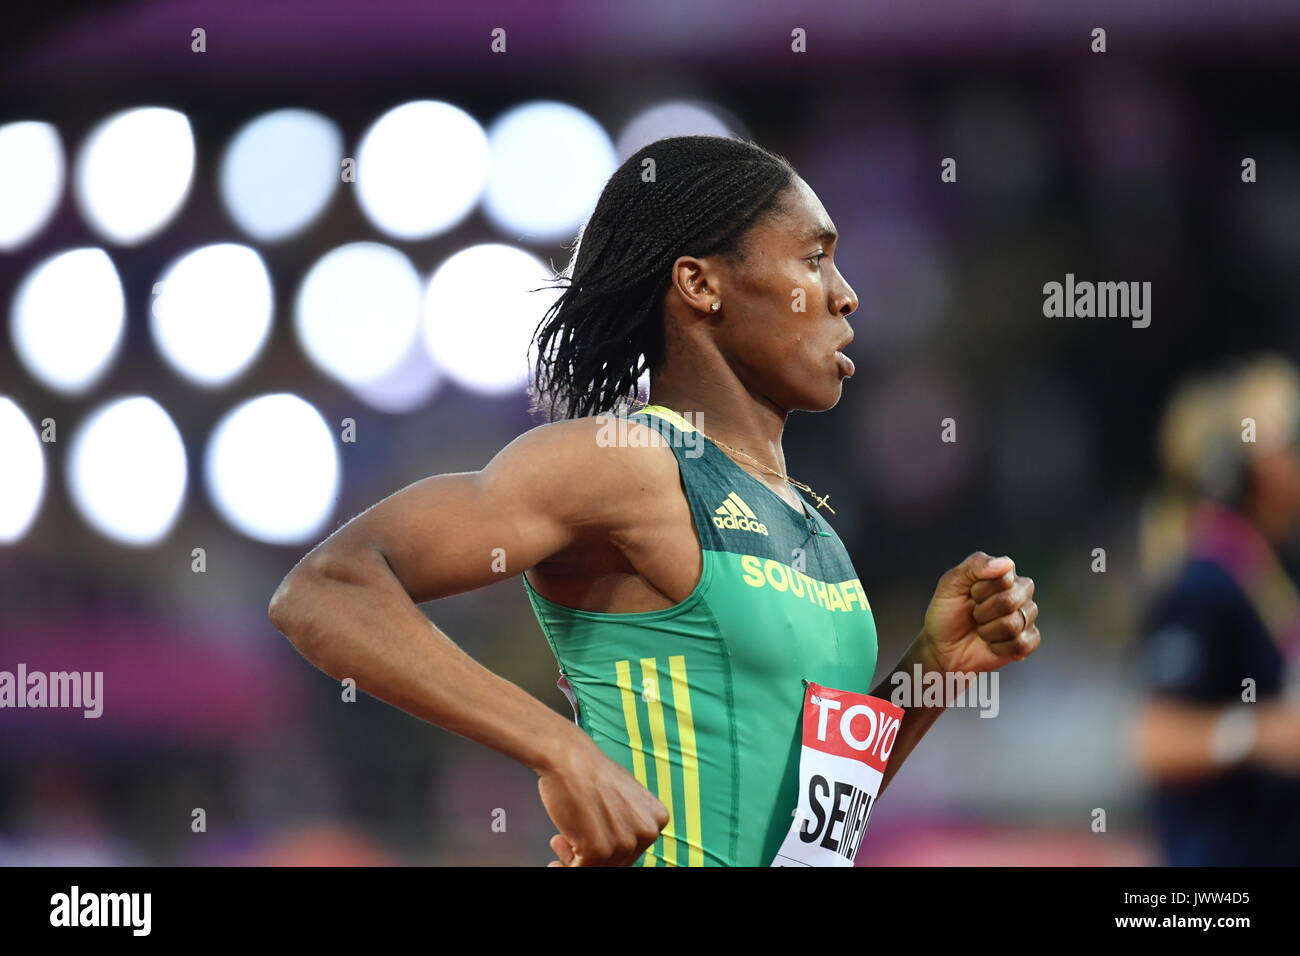 London, UK. 13th Aug, 2017. Southafrica's Caster Semenya in action winning the 800 metre race final at the IAAF London 2017 World Athletics Championships in London, United Kingdom, 13 August 2017. Photo: Bernd Thissen/dpa/Alamy Live News Stock Photo